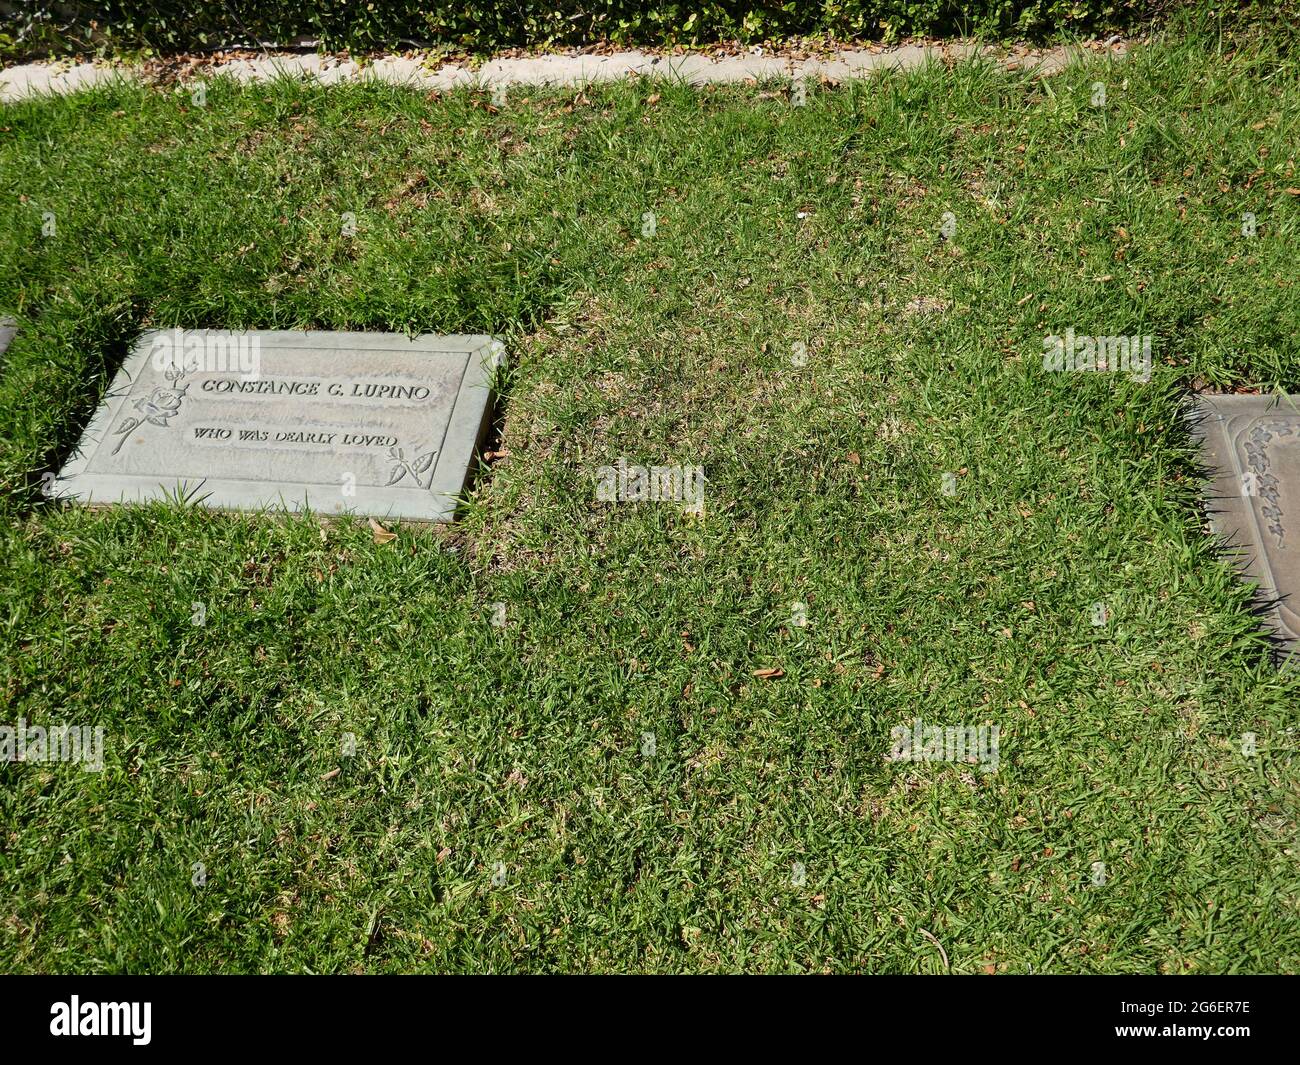 Glendale, California, USA 1st July 2021 A general view of atmosphere of Actress Constance Lupino's Grave and possible Ida Lupino Unmarked Grave at Forest Lawn Memorial Park on July 1, 2021 in Glendale, California, USA. Photo by Barry King/Alamy Stock Photo Stock Photo